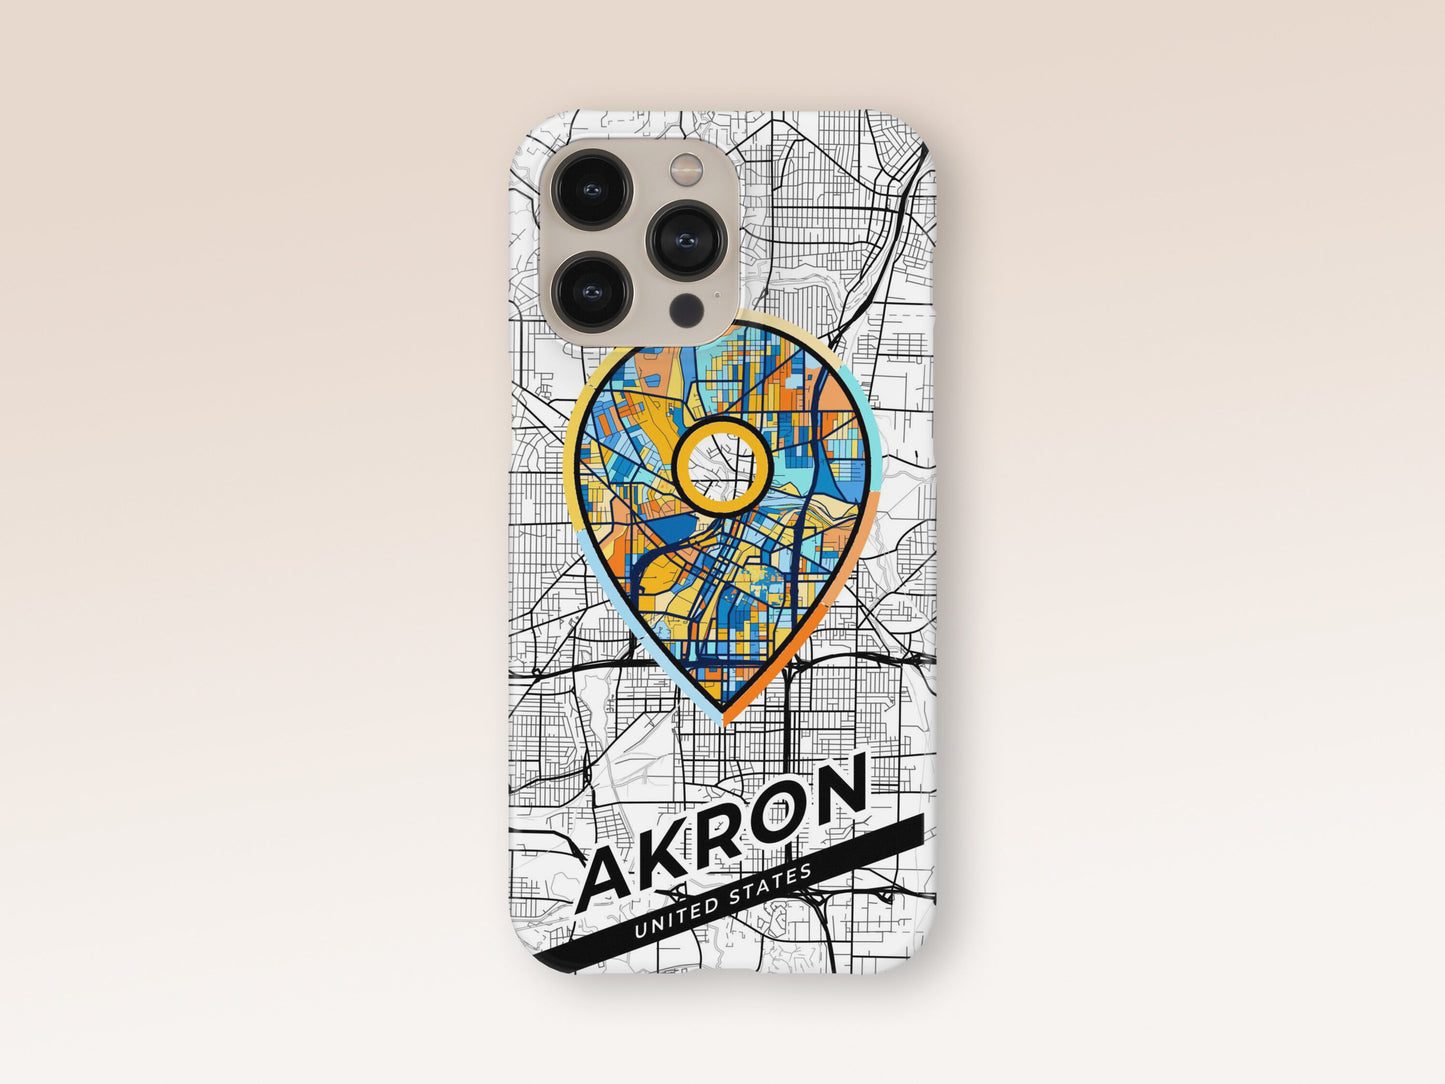 Akron Ohio slim phone case with colorful icon. Birthday, wedding or housewarming gift. Couple match cases. 1